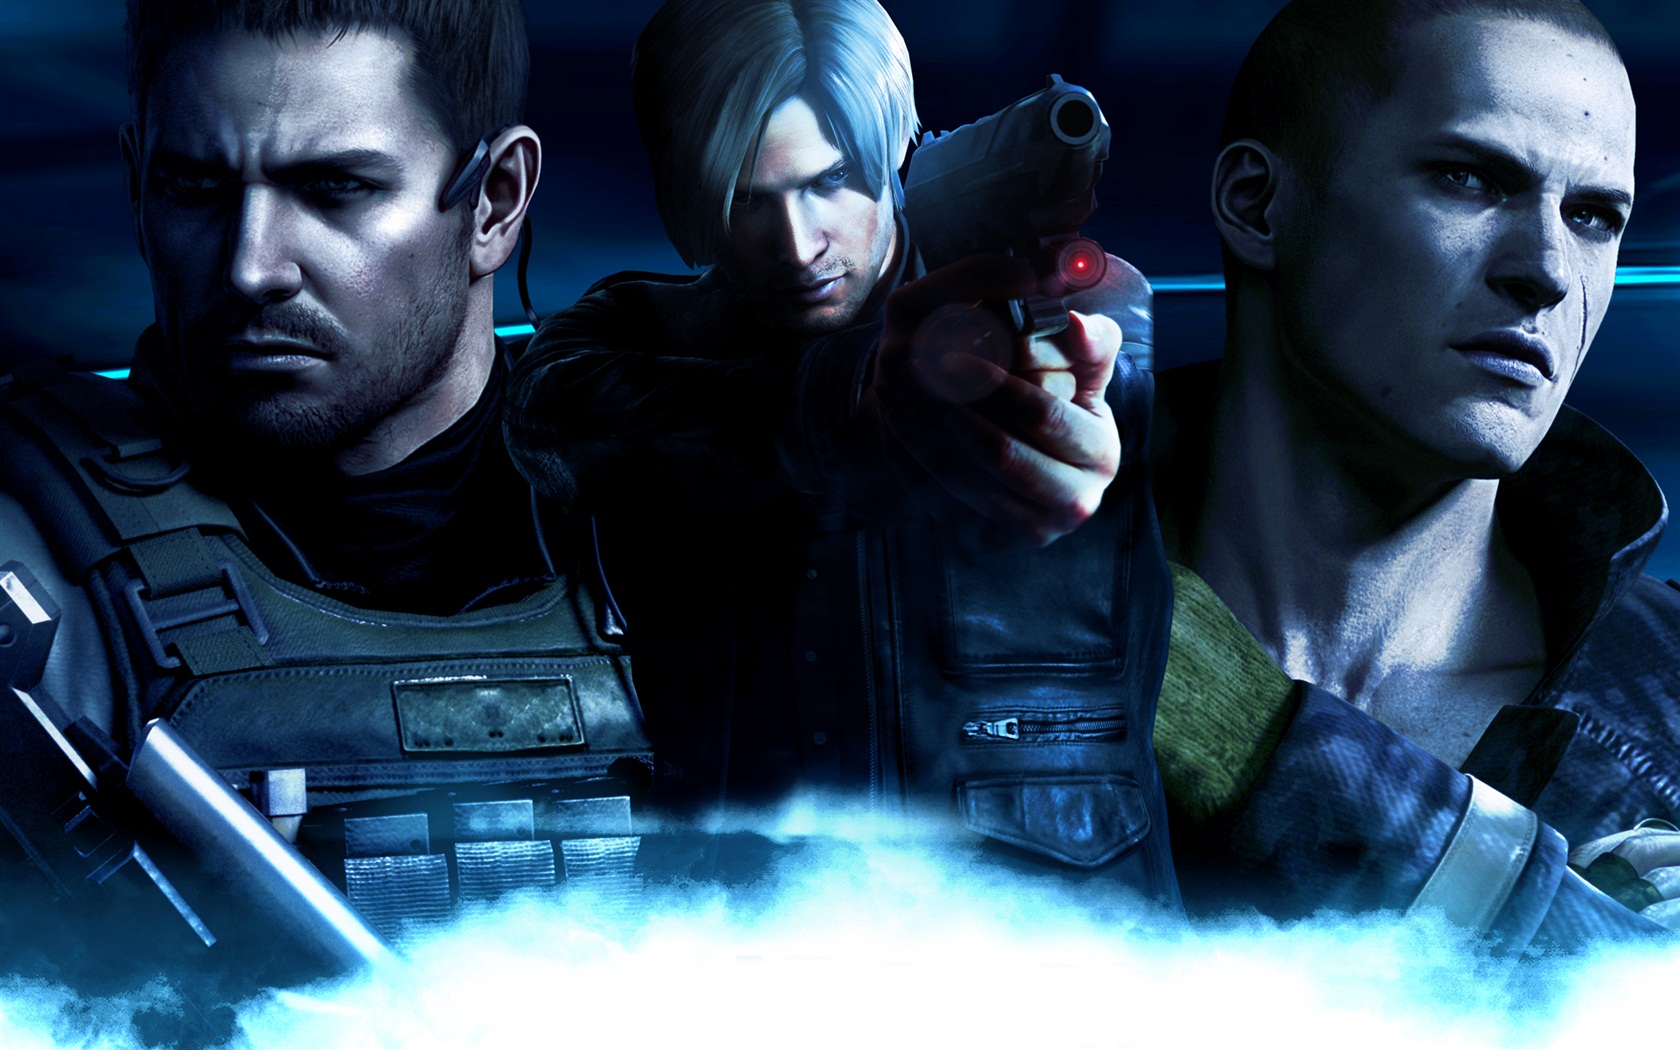 Resident Evil 6 HD game wallpapers #6 - 1680x1050